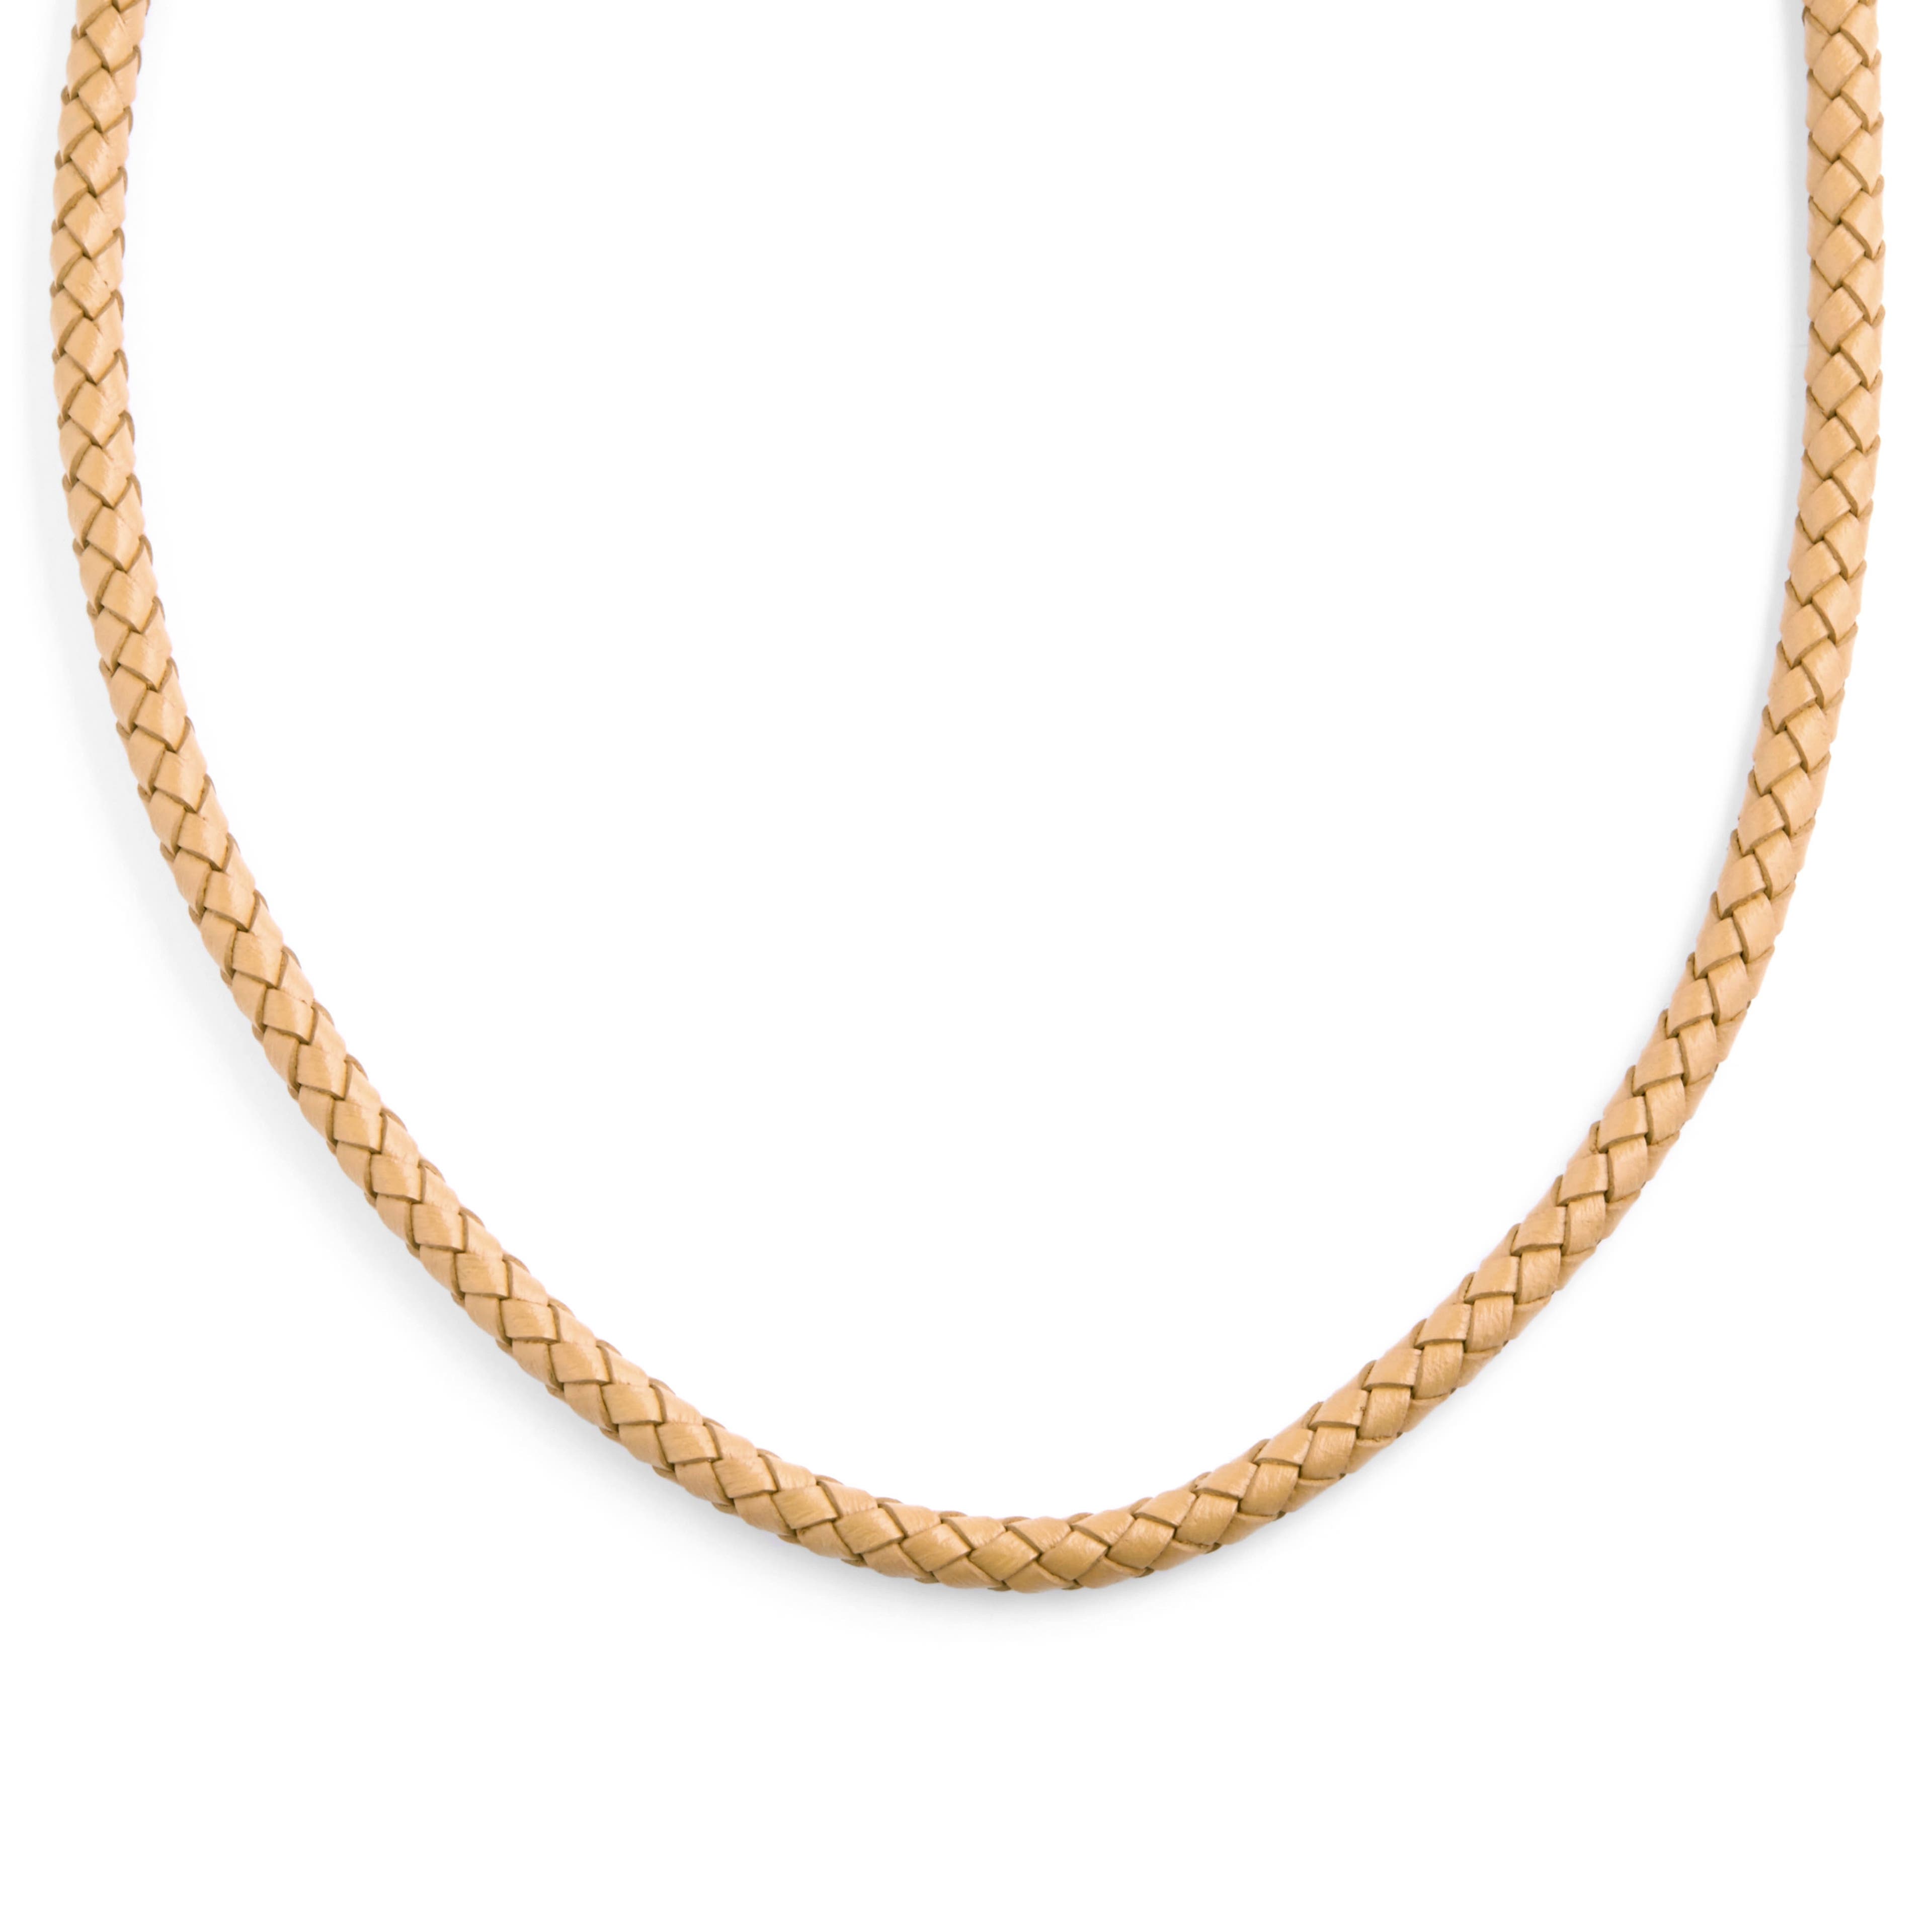 Tenvis | 5 mm Sand Leather Necklace